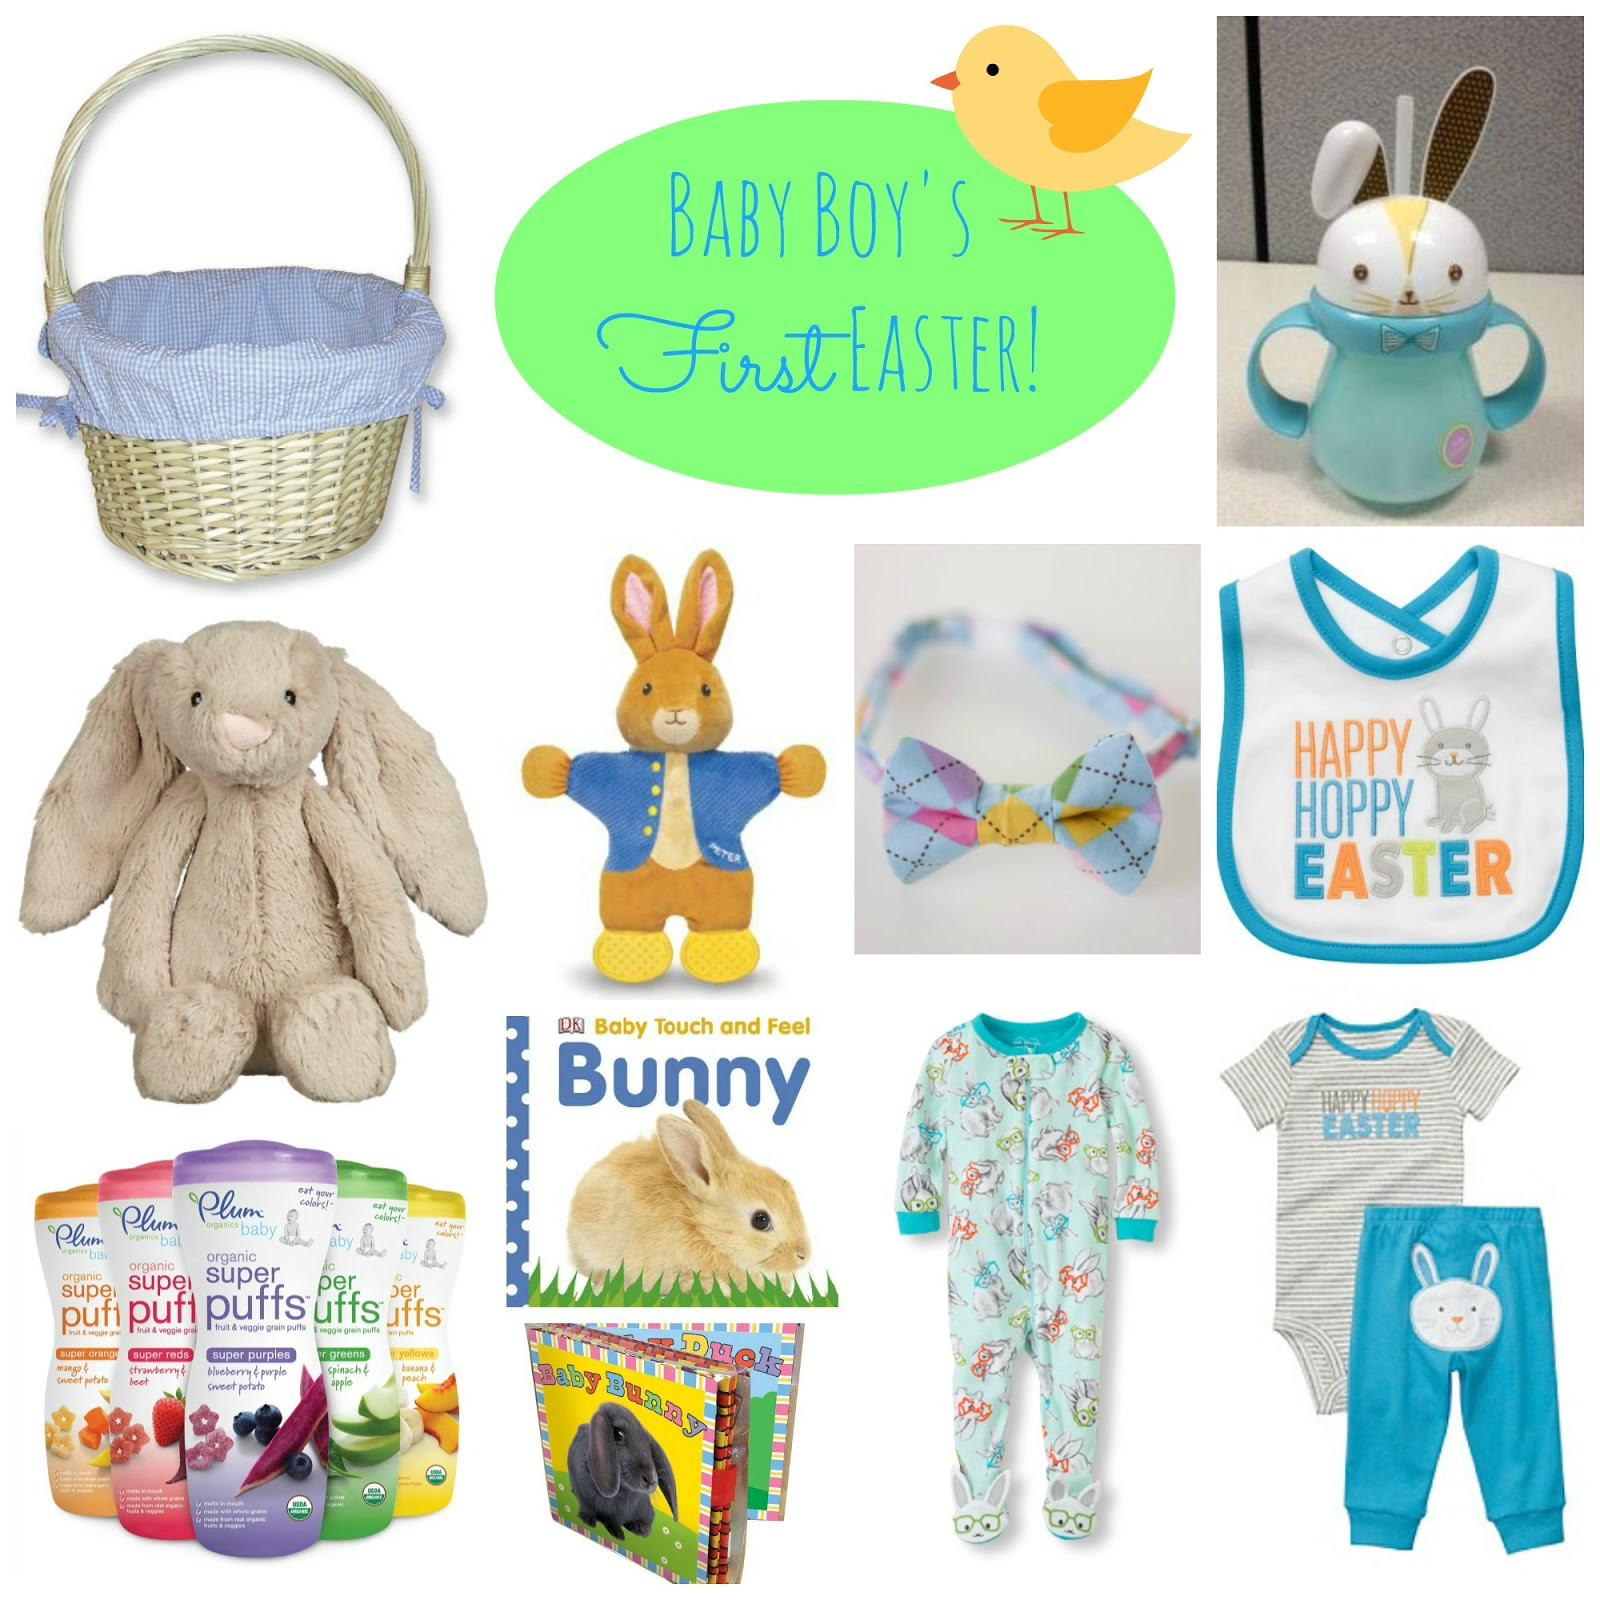 Baby First Easter Basket Ideas
 Simple Suburbia Baby s First Easter Basket Ideas